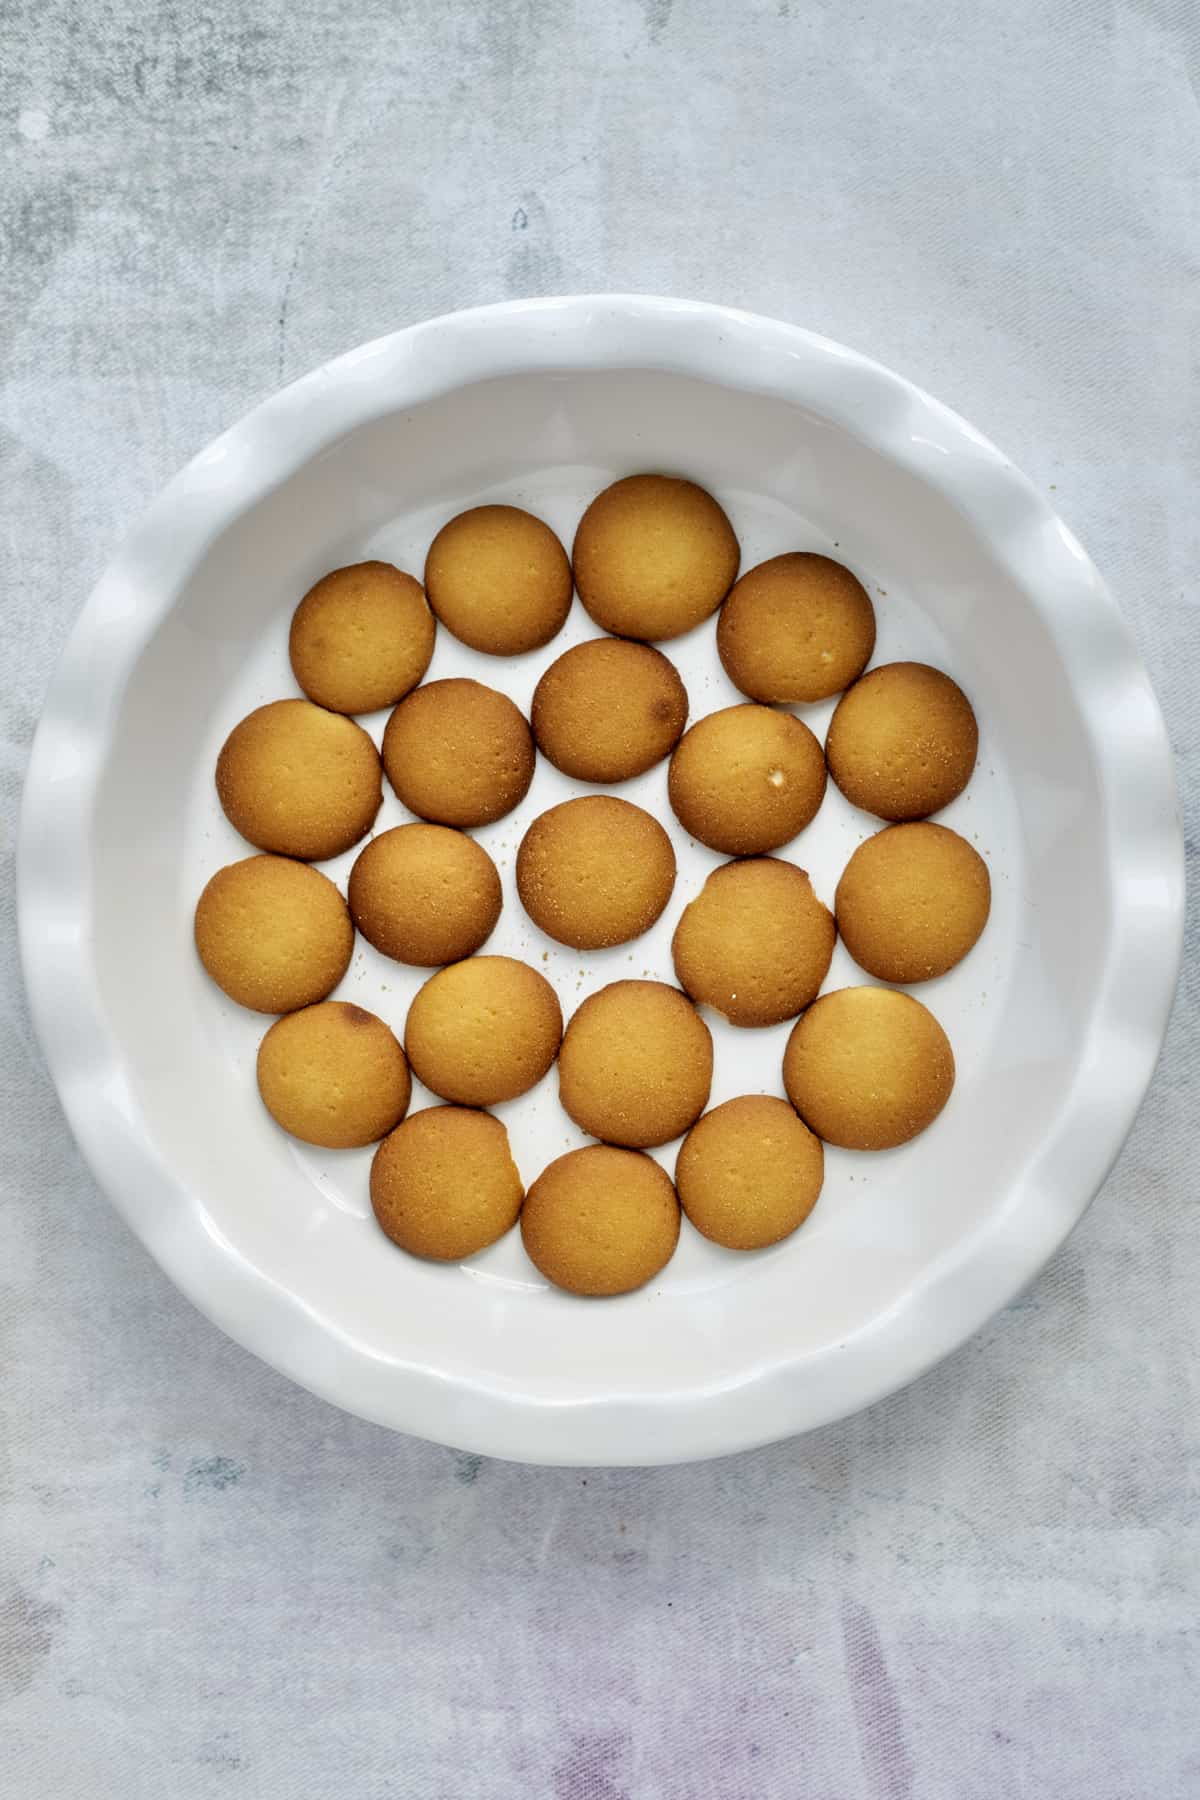 Nilla wafers in the bottom of a baking dish